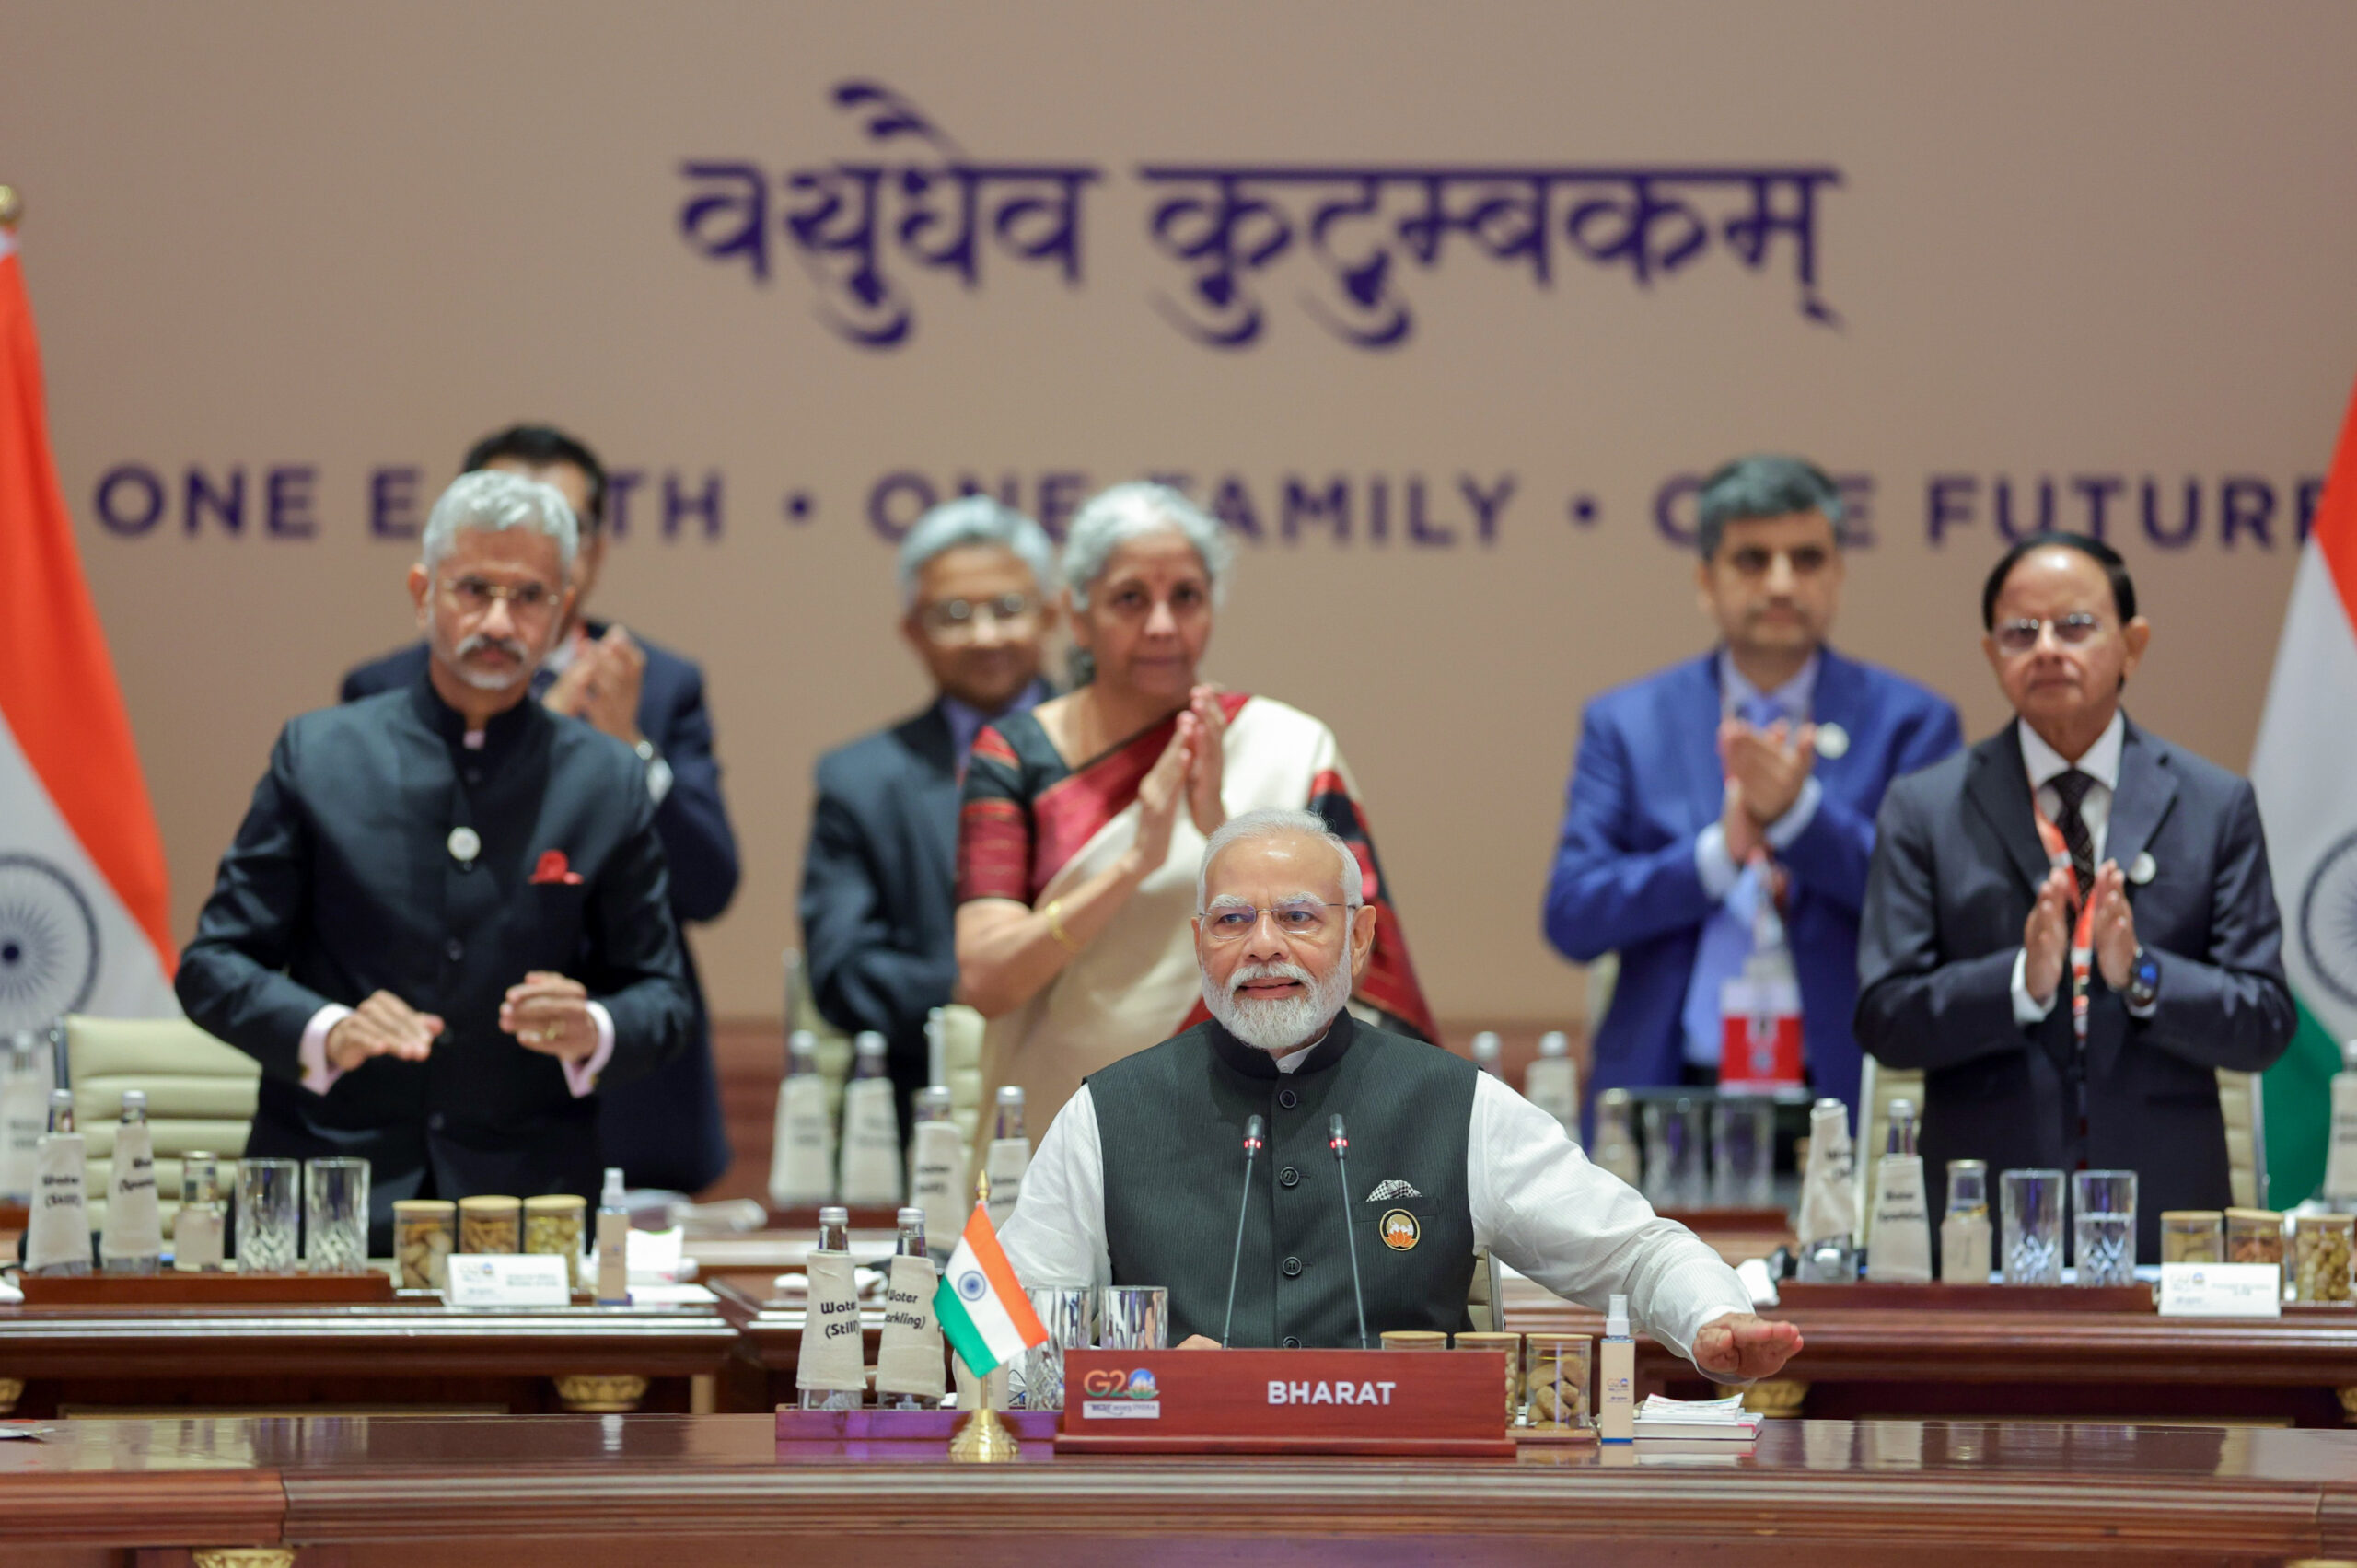 PM Modi announces conclusion of the G20 Summit,suggests a virtual review session in November